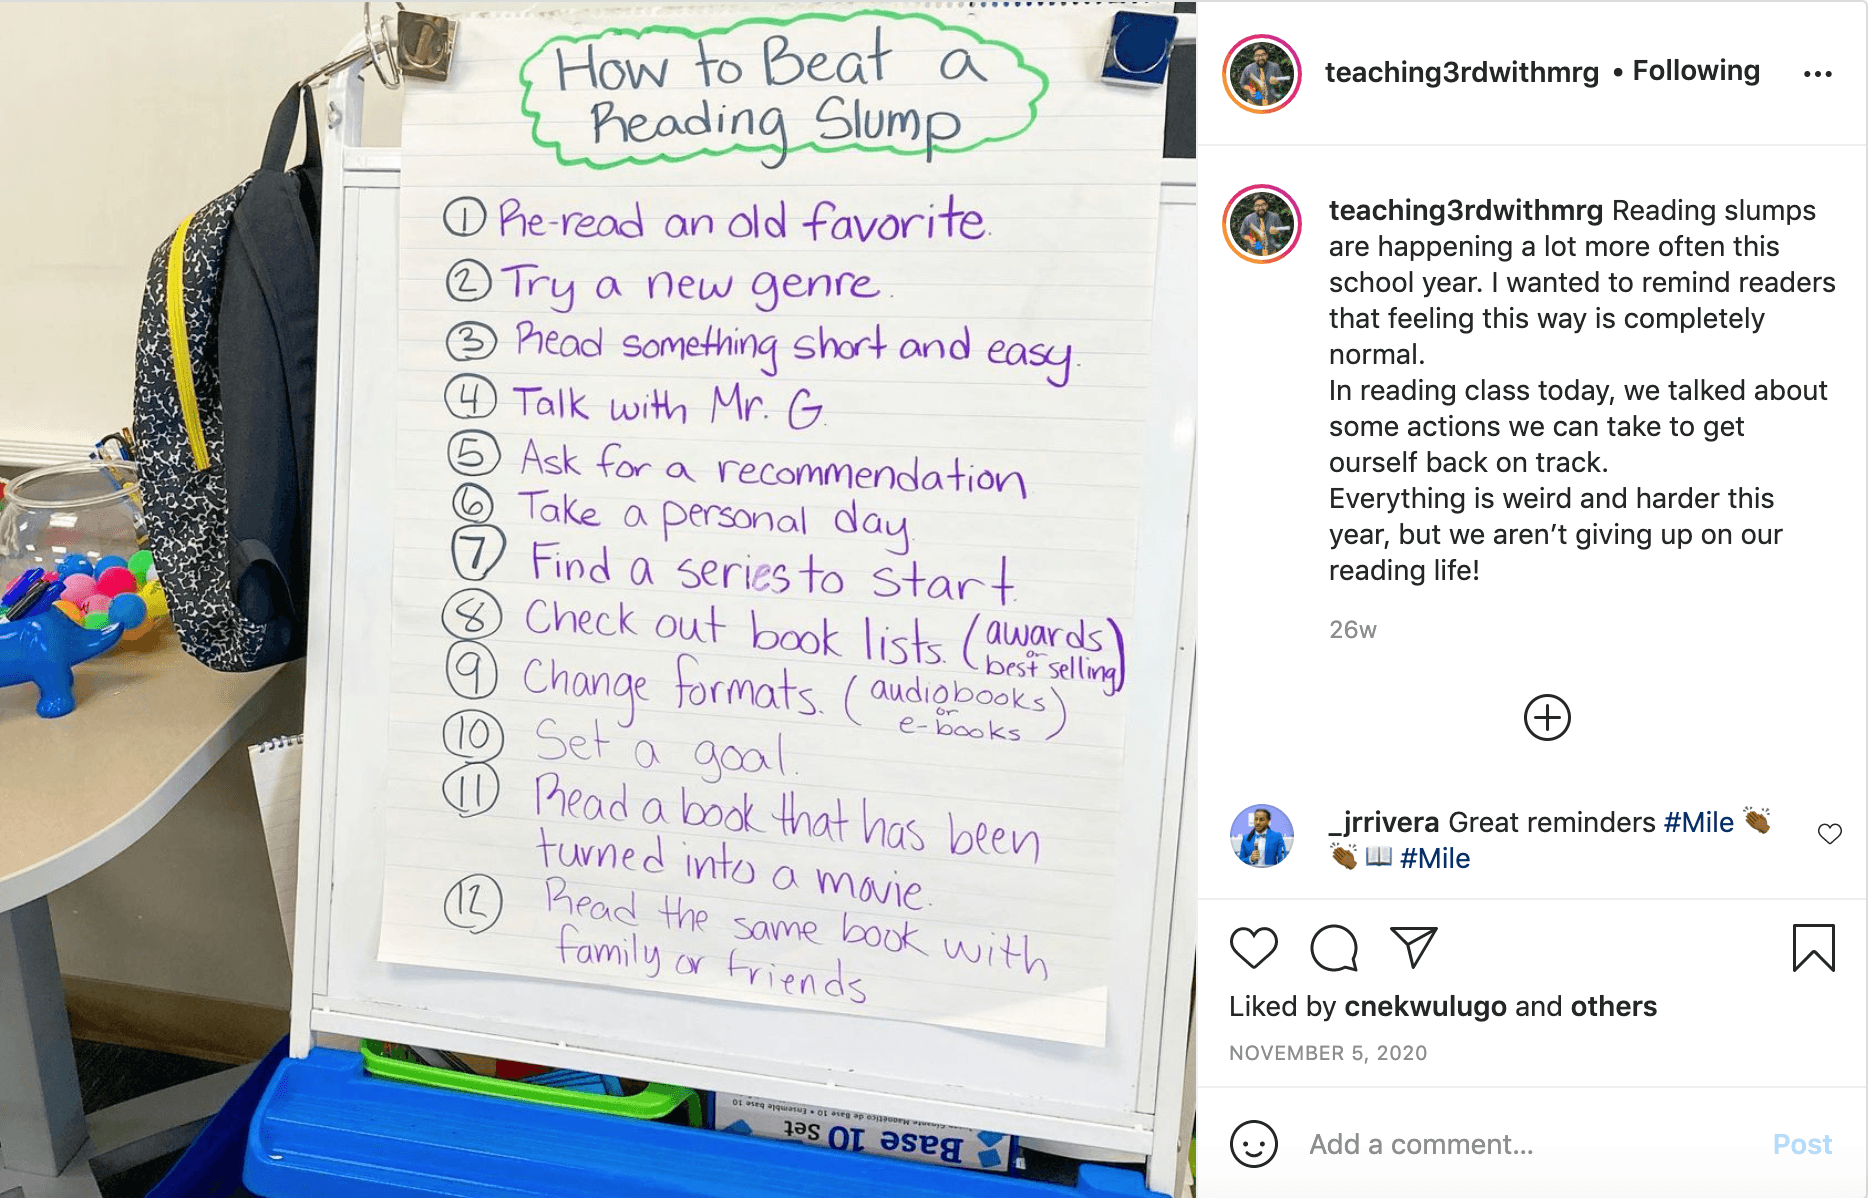 An Instagram post from Juan Edward Gonzales, Jr, showing a post with the heading, "How to Beat a Reading Slump." The first few suggestions include: "Re-read an old favorite, Try a new genre, Read something short and easy, Talk with Mr. G." The caption begins, "Reading slumps are happening a lot more often this school year. I want to remind readers that feeling this way is completely normal. In reading class today, we talked about some actions we can take to get ourself back on track."